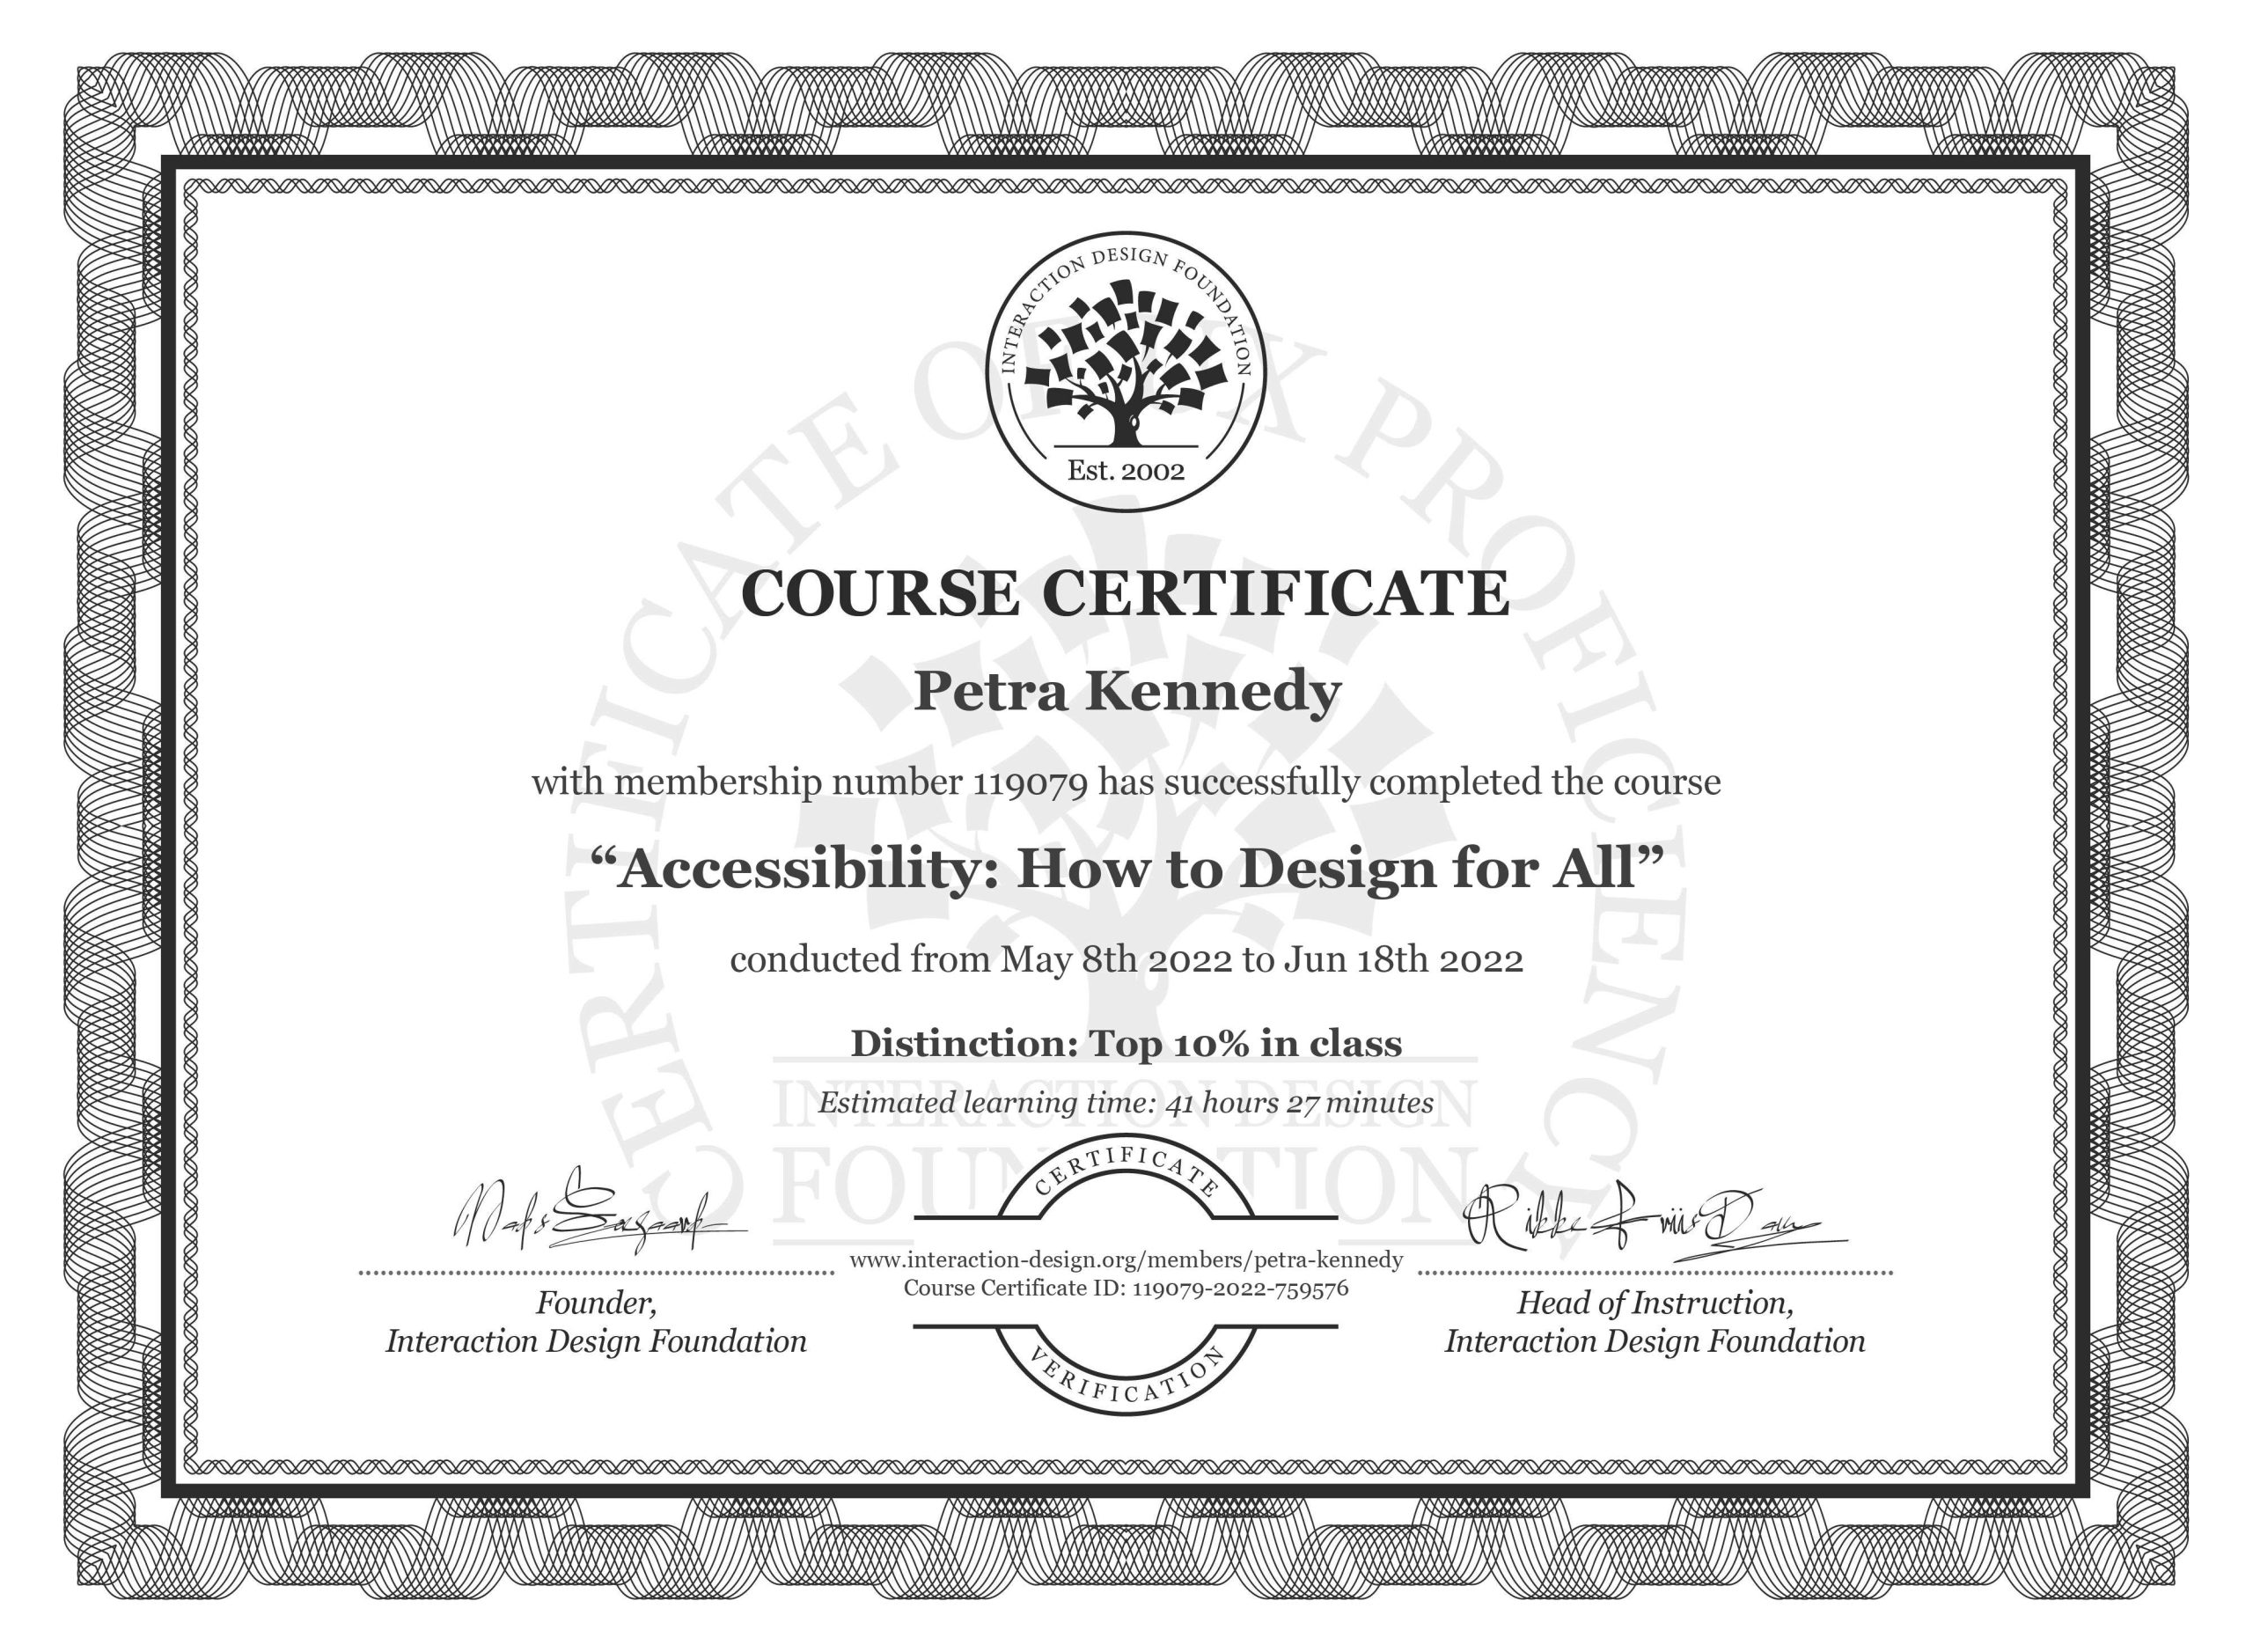 IxDF course certificate Accessibility: How to design for all